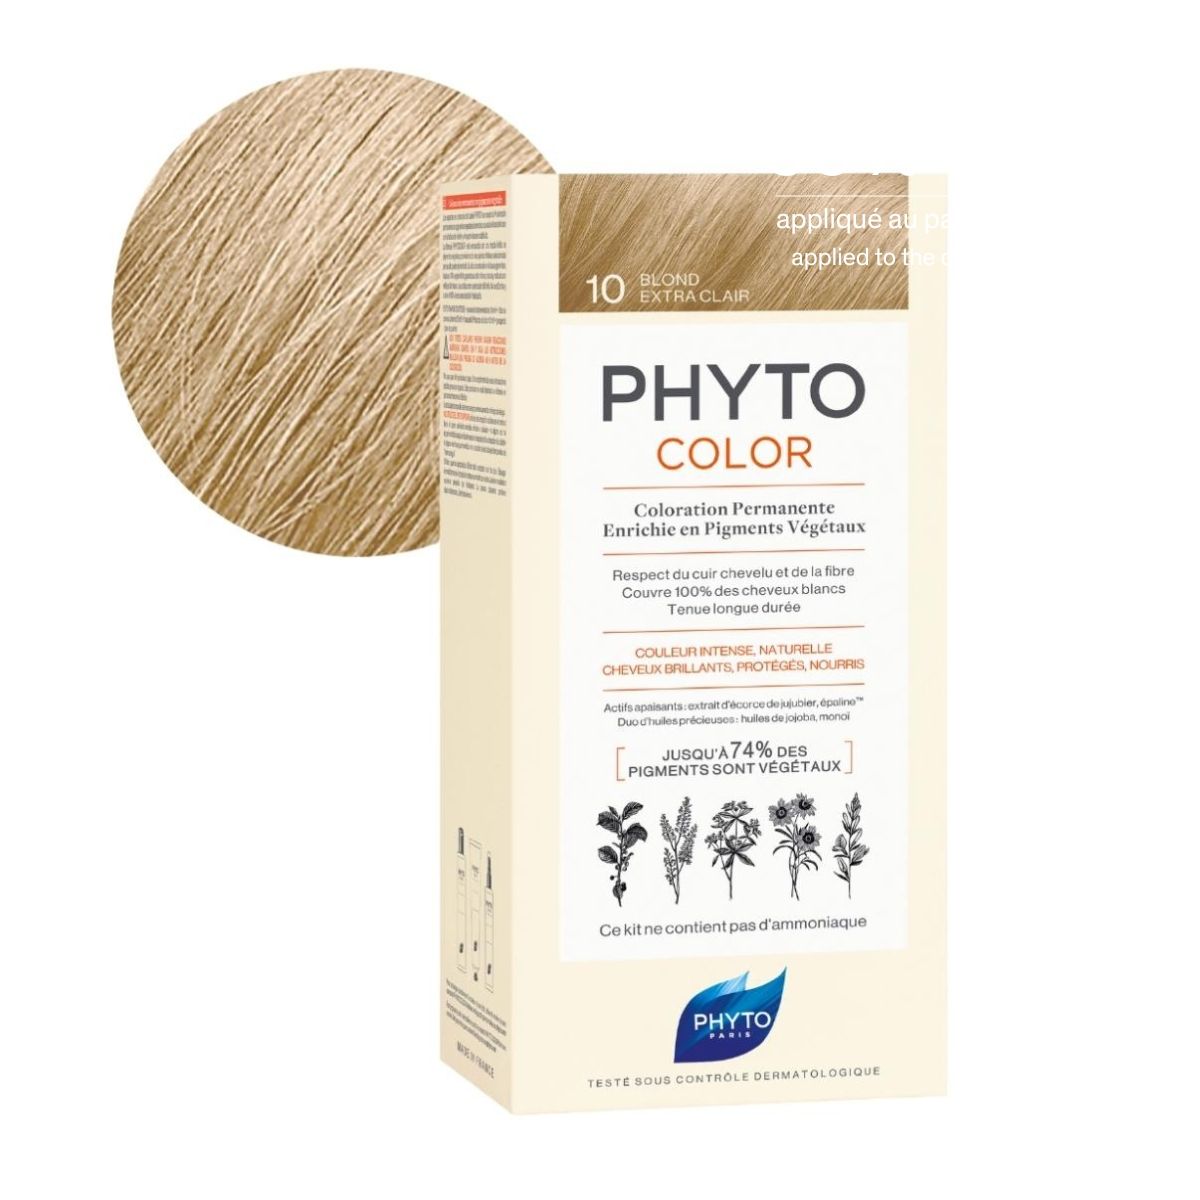 PHYTOCOLOR 10 Blond Extra Clair